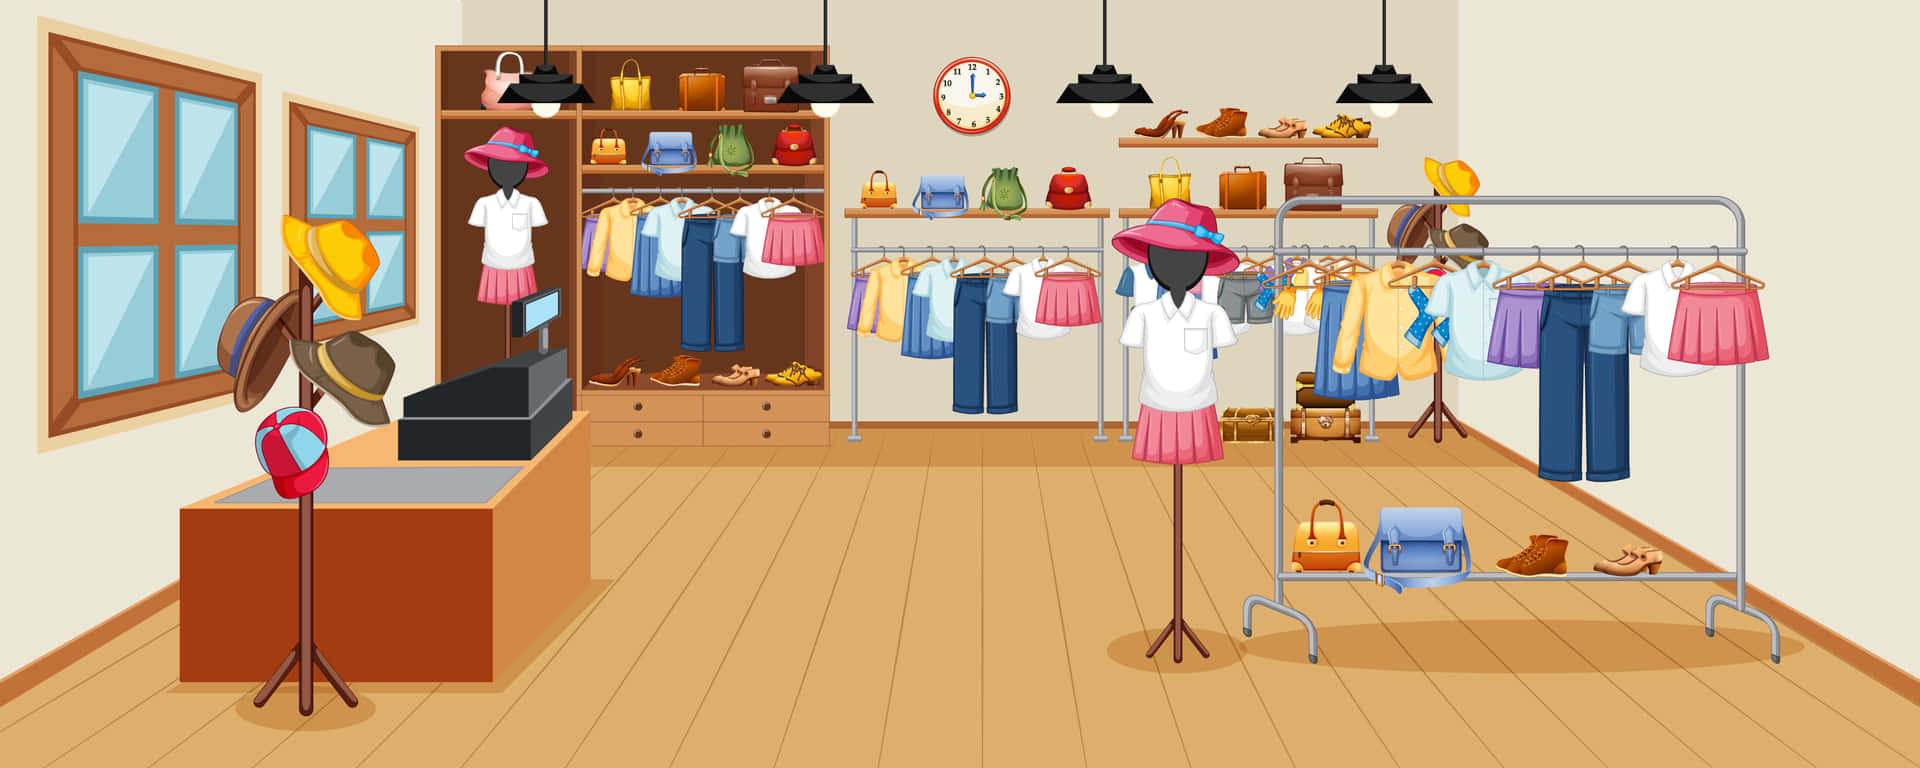 A Cartoon Illustration Of A Clothing Store